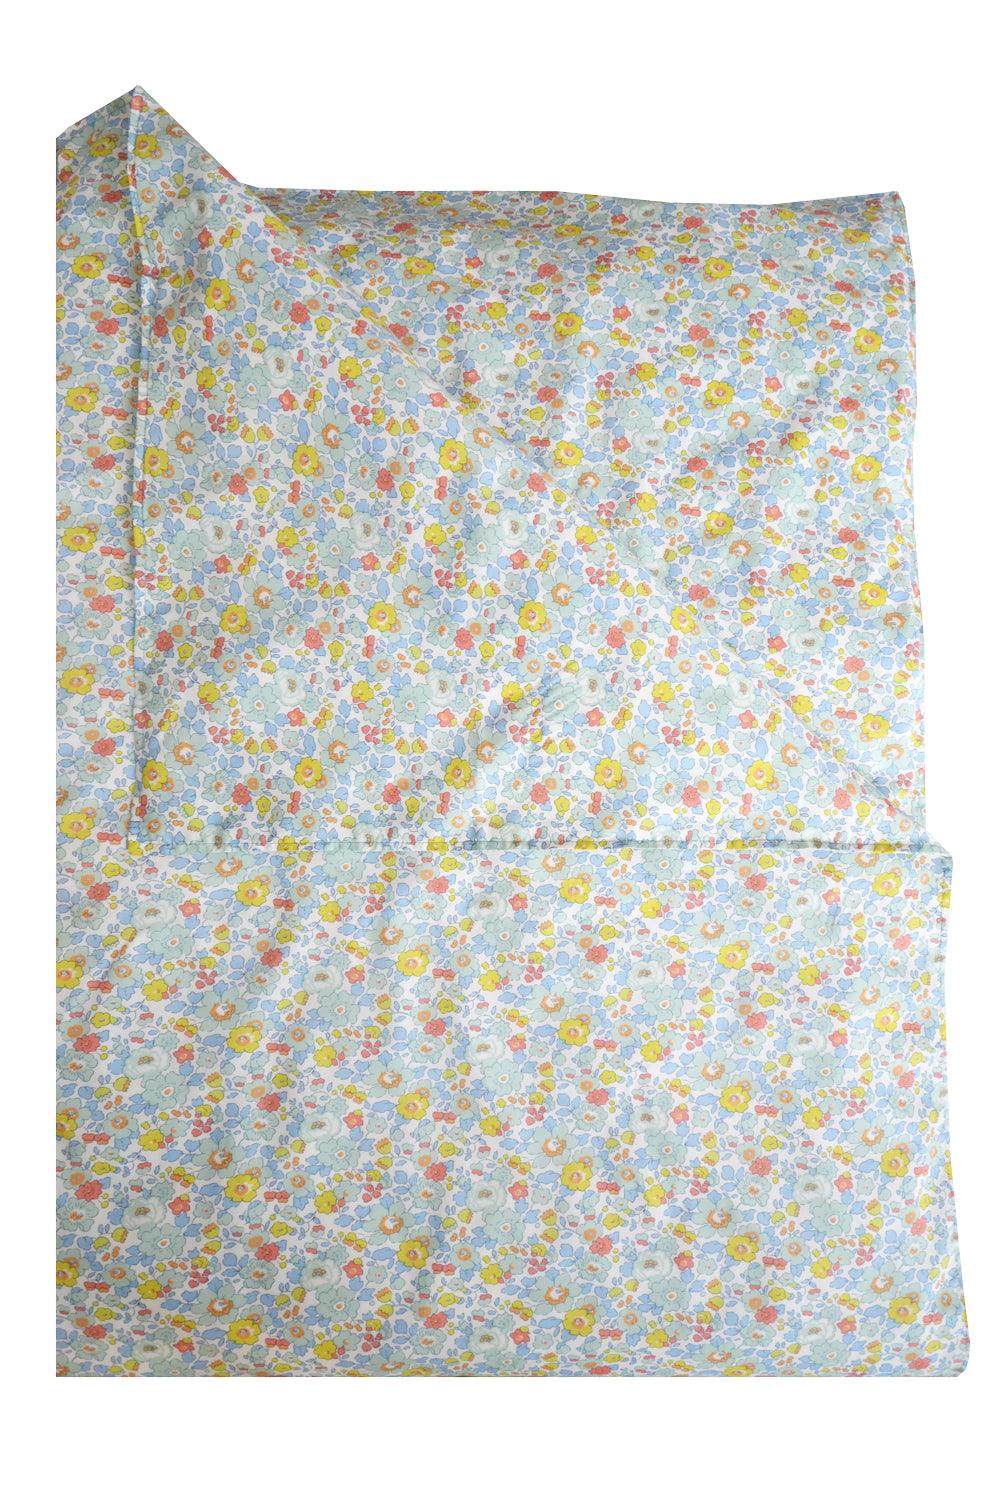 Bedding made with Liberty Fabric BETSY SAGE - Coco & Wolf